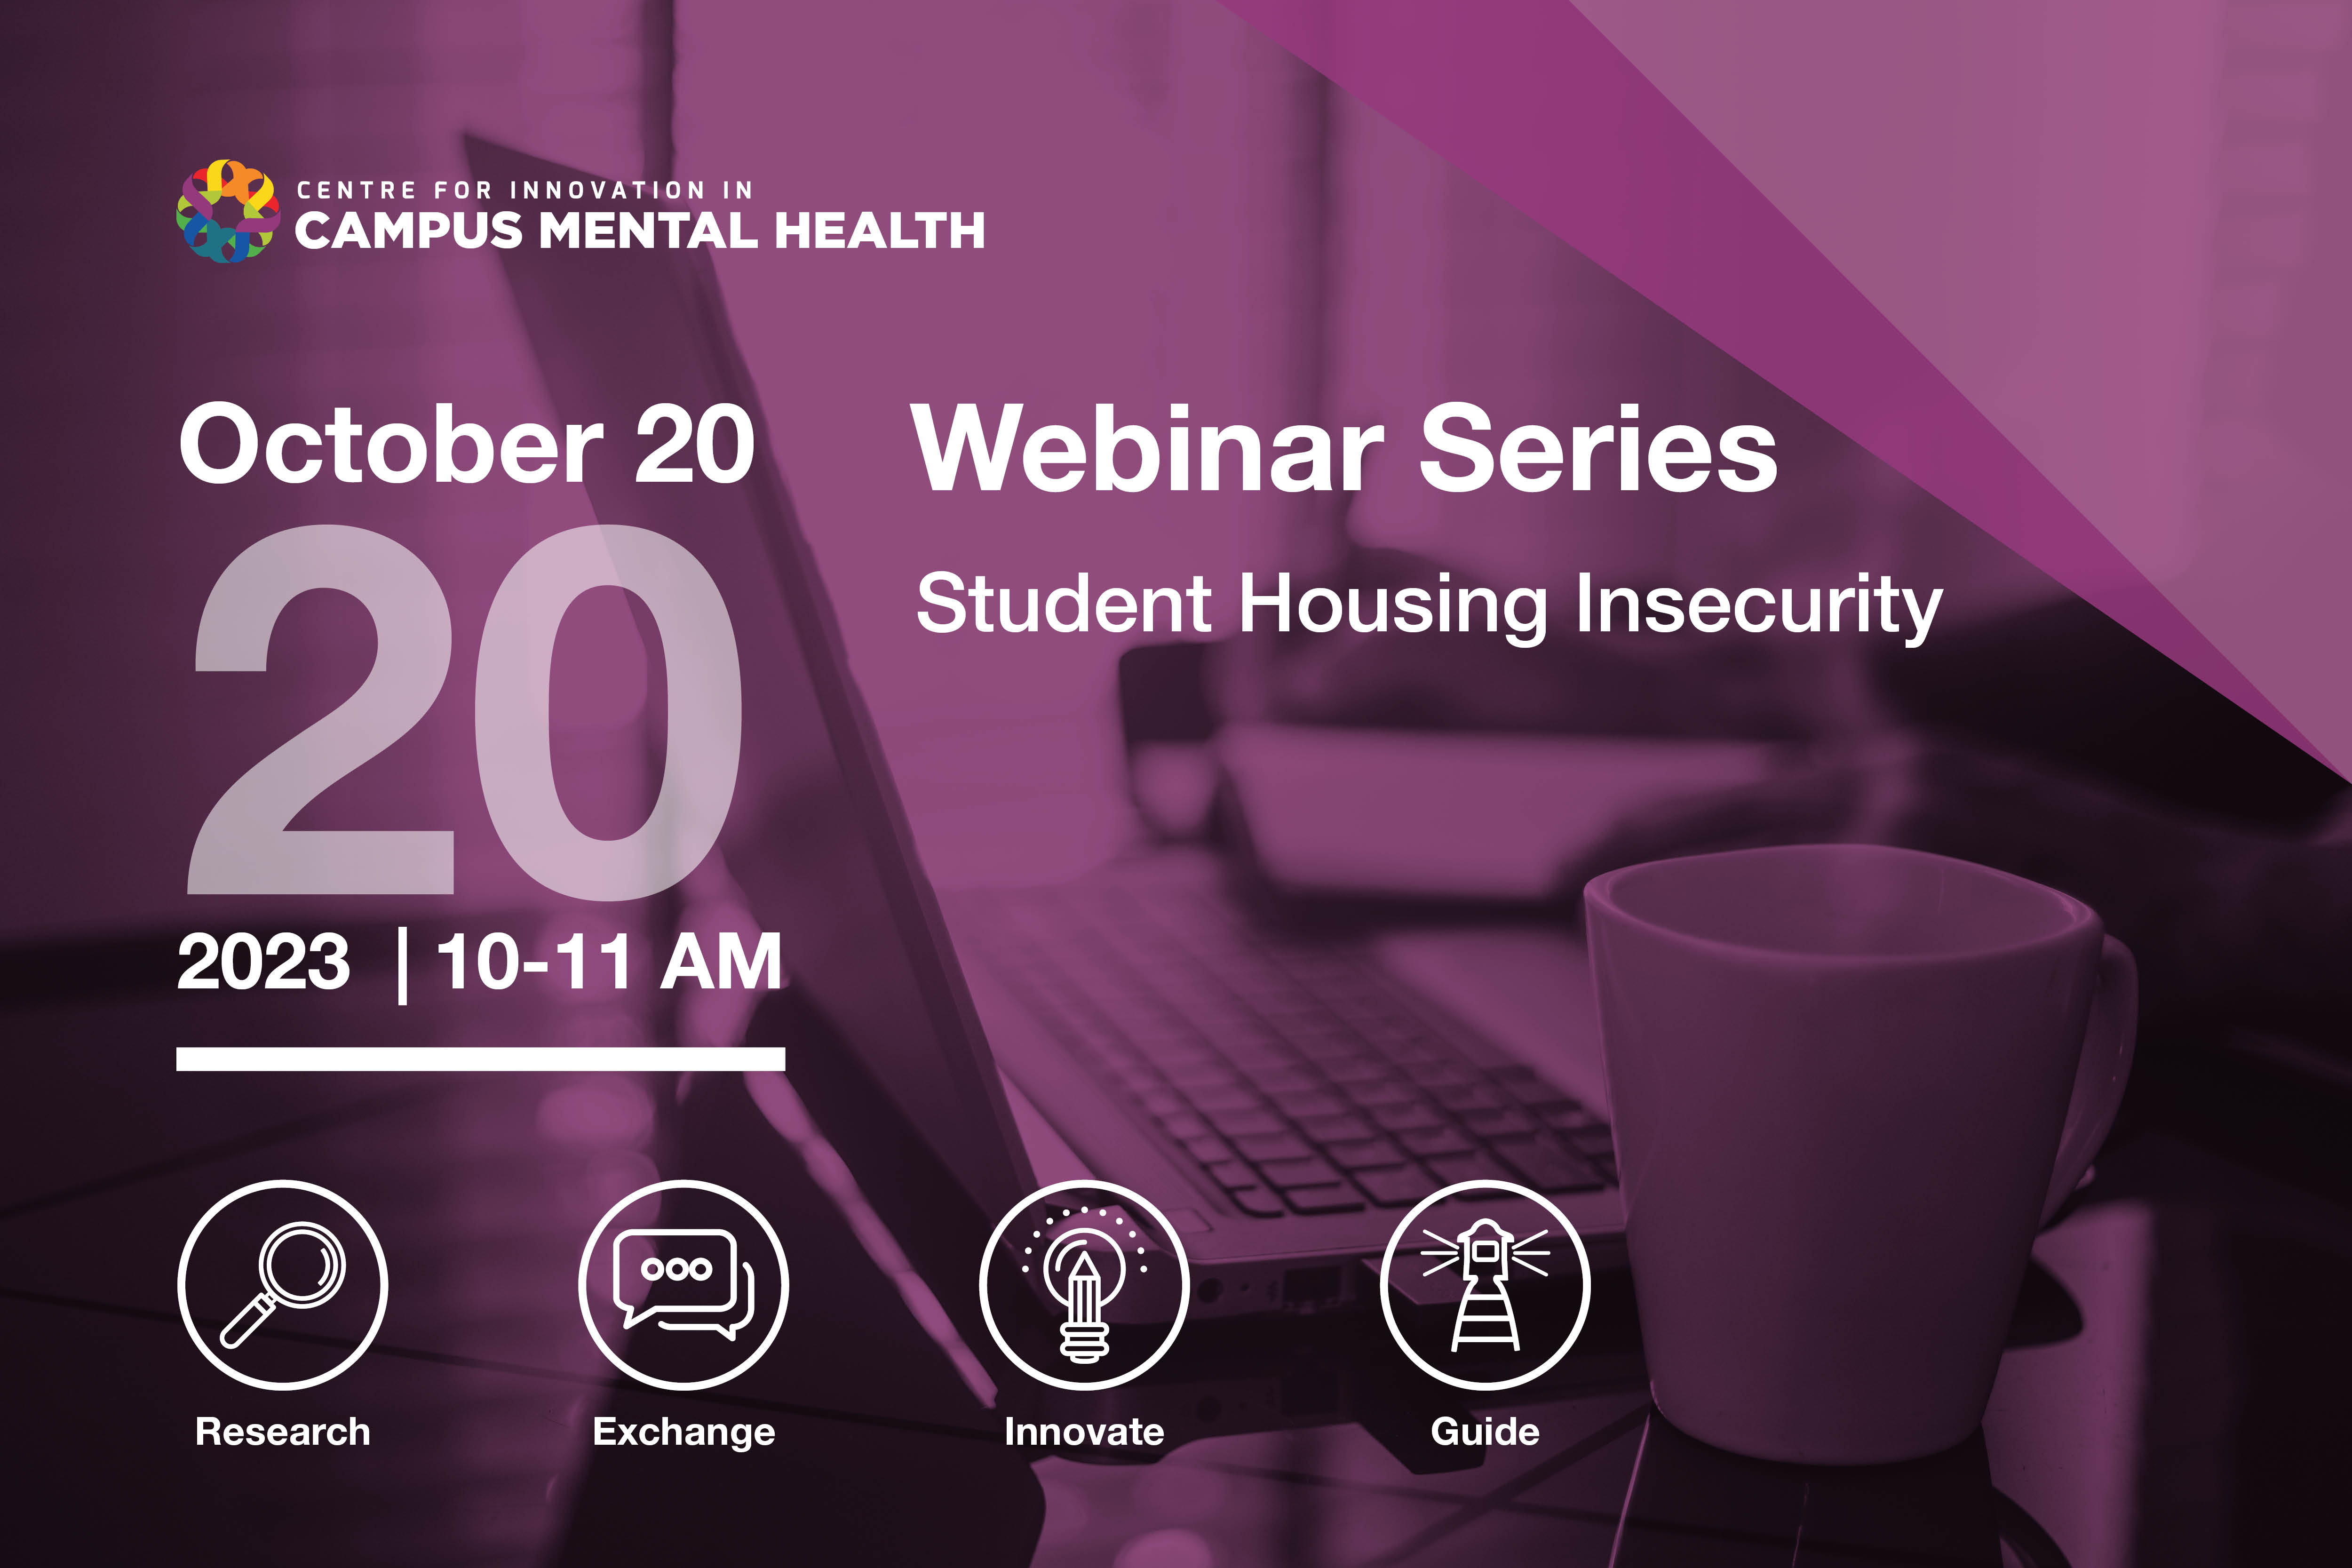 The image describes a webinar on Student Housing Insecurity. It will be held on October 20th, 2023, at 10 AM Eastern Standard Time. This is part of a Webinar Series by CICMH